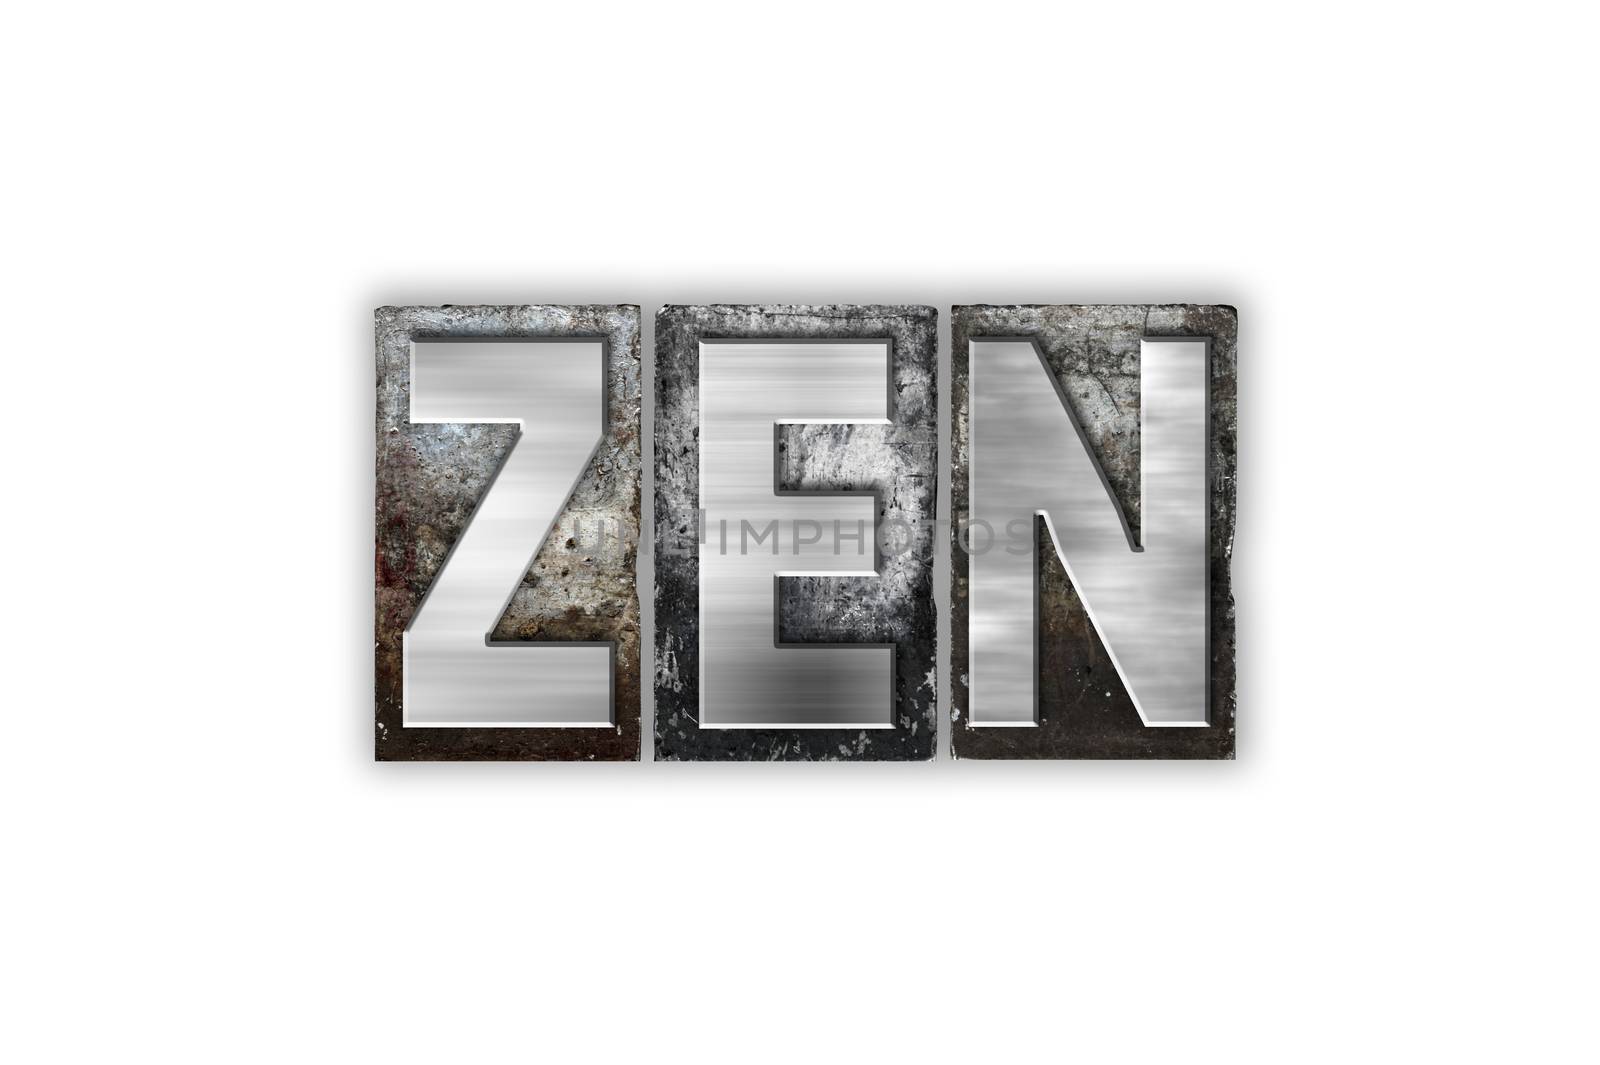 The word "Zen" written in vintage metal letterpress type isolated on a white background.